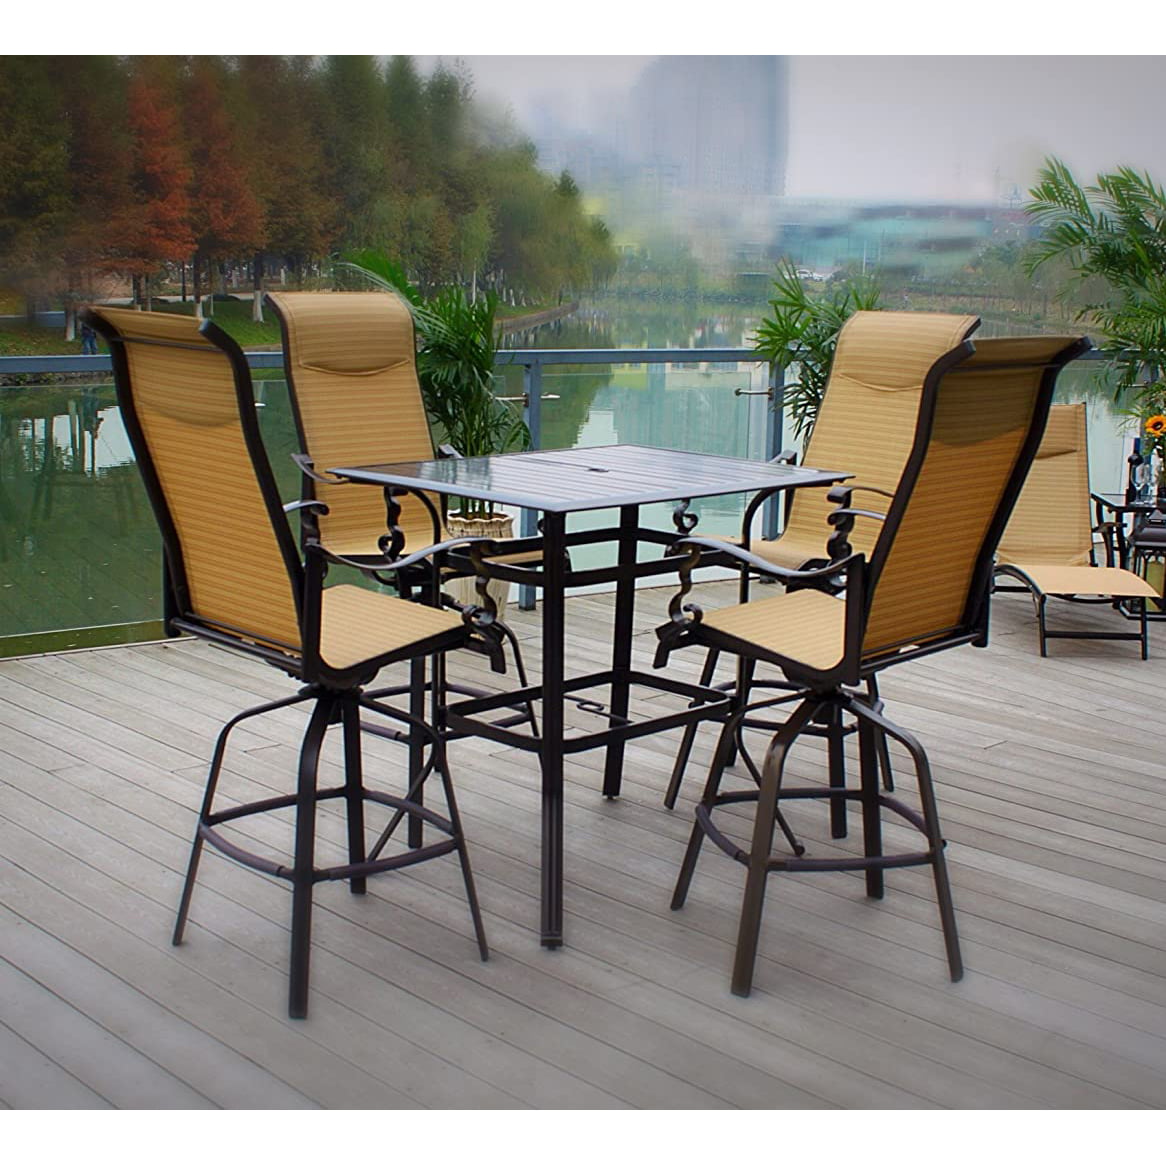 Pebble Lane Living Set of 8 Premium Wicker Patio Bar Swivel Stools with Back and Arms 